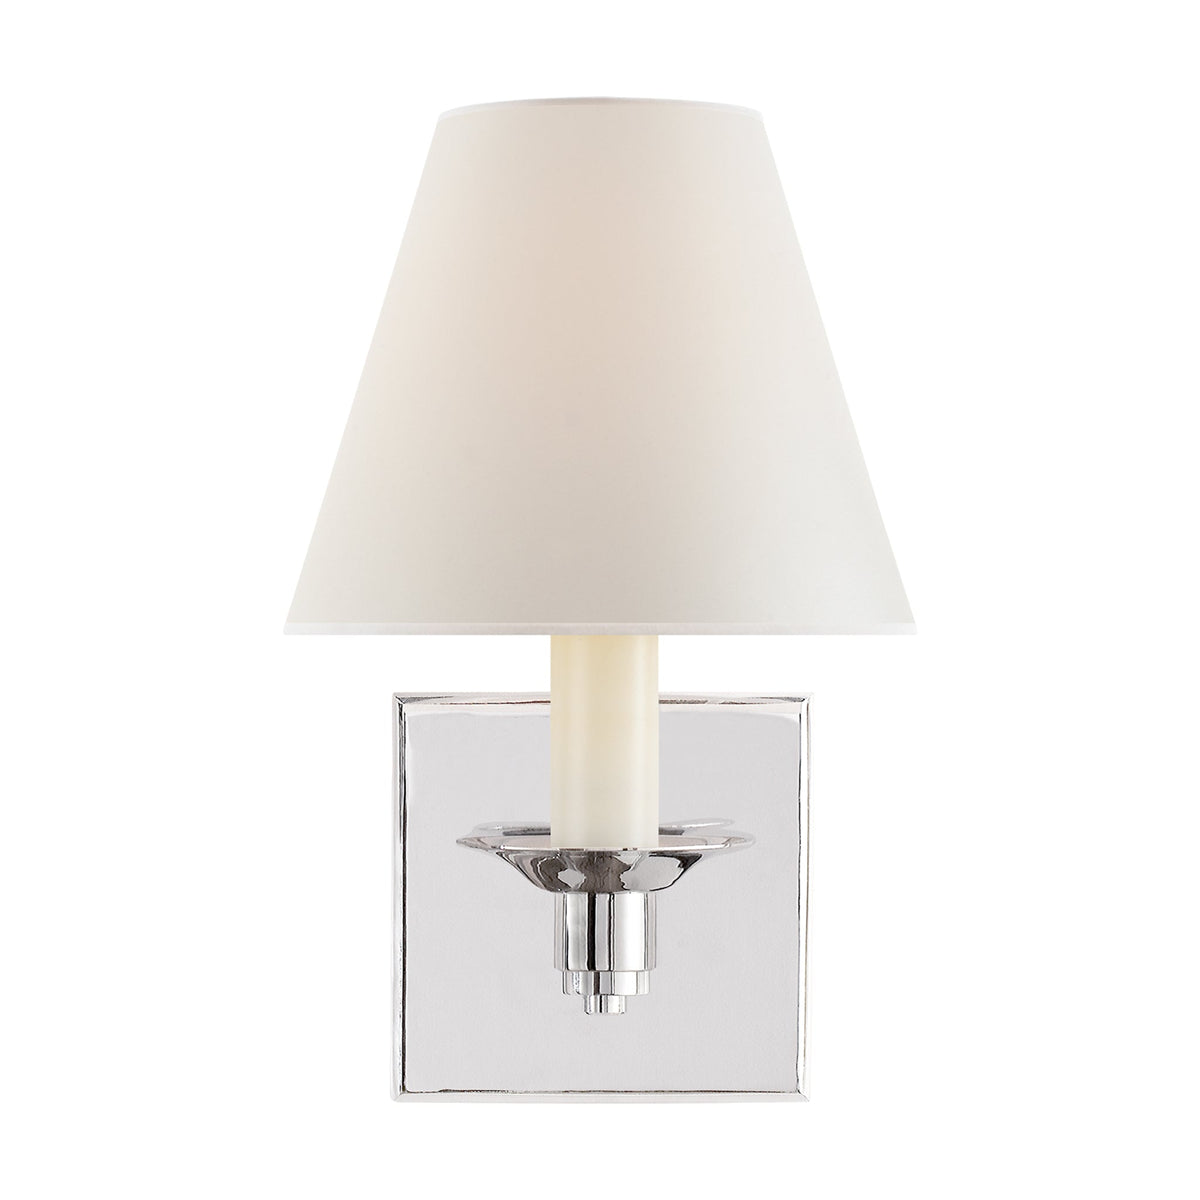 EVANS SINGLE ARM SCONCE IN POLISHED NICKEL WITH PERCALE SHADE